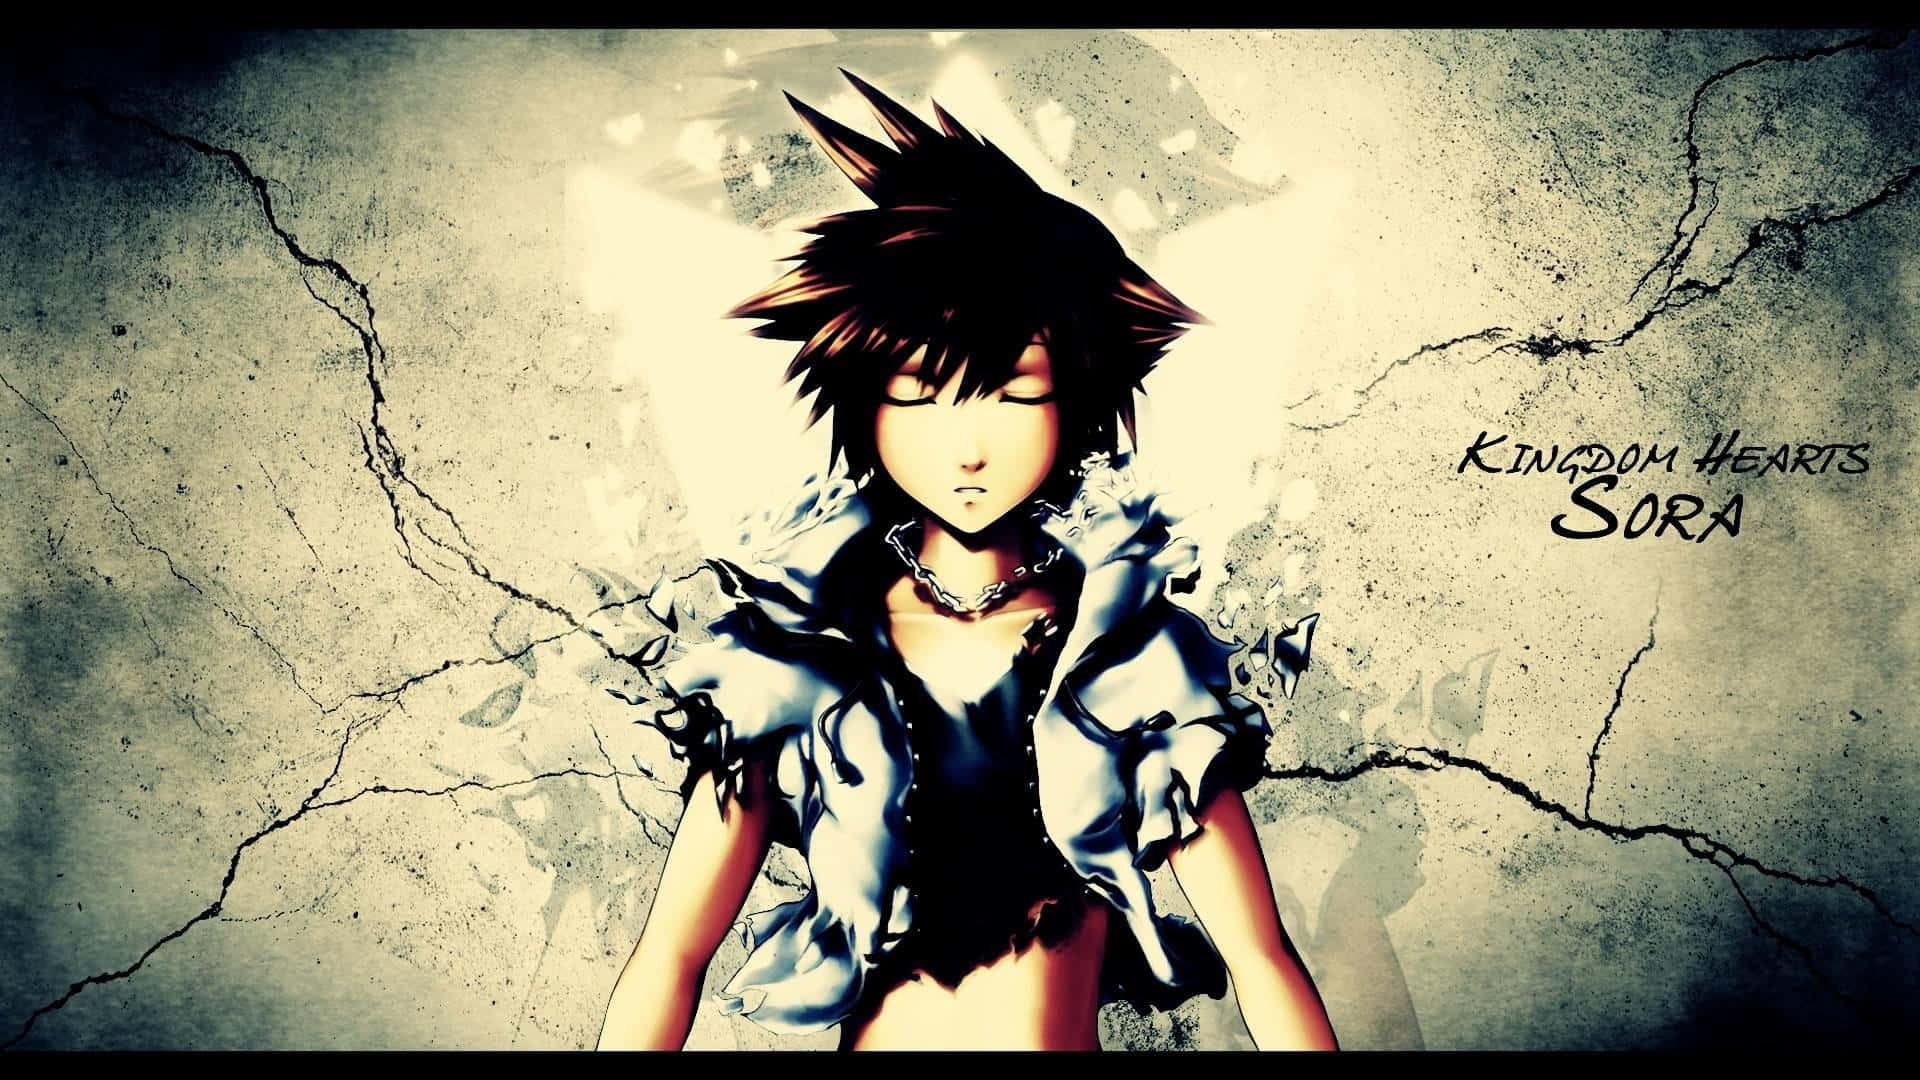 Sora in Action: Unleashing his Keyblade in the World of Kingdom Hearts Wallpaper